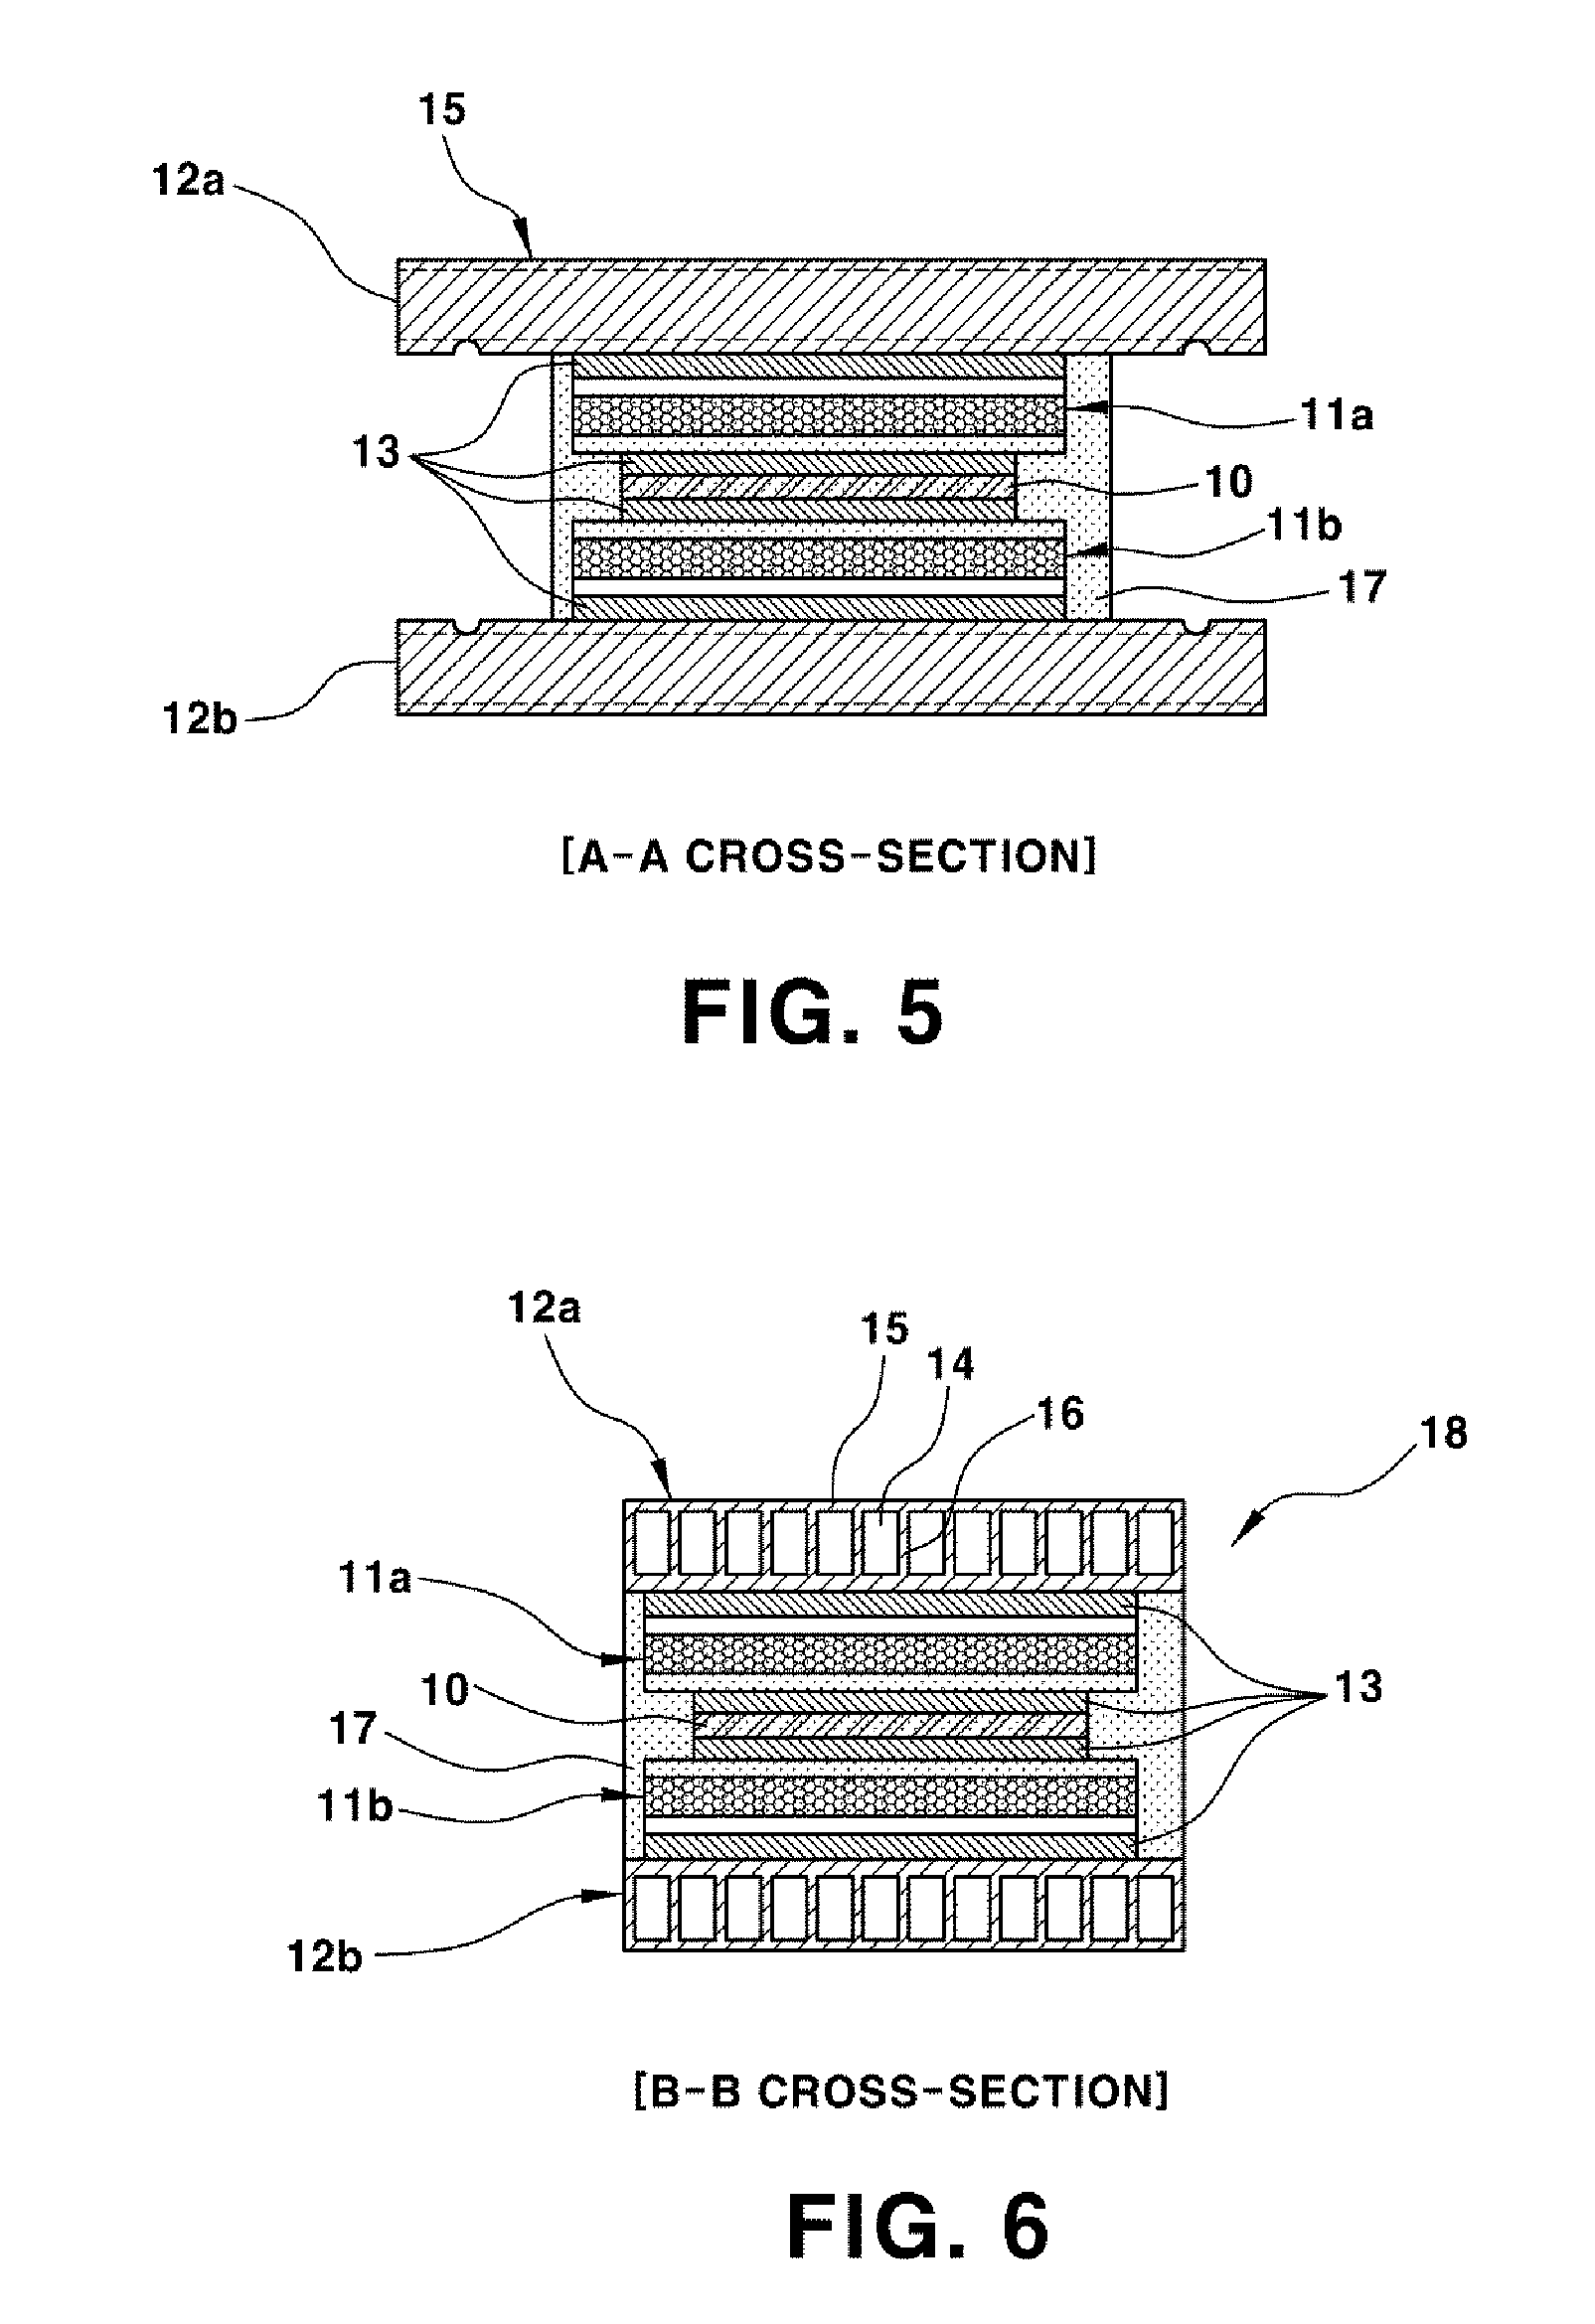 Heat sink-integrated double-sided cooled power module